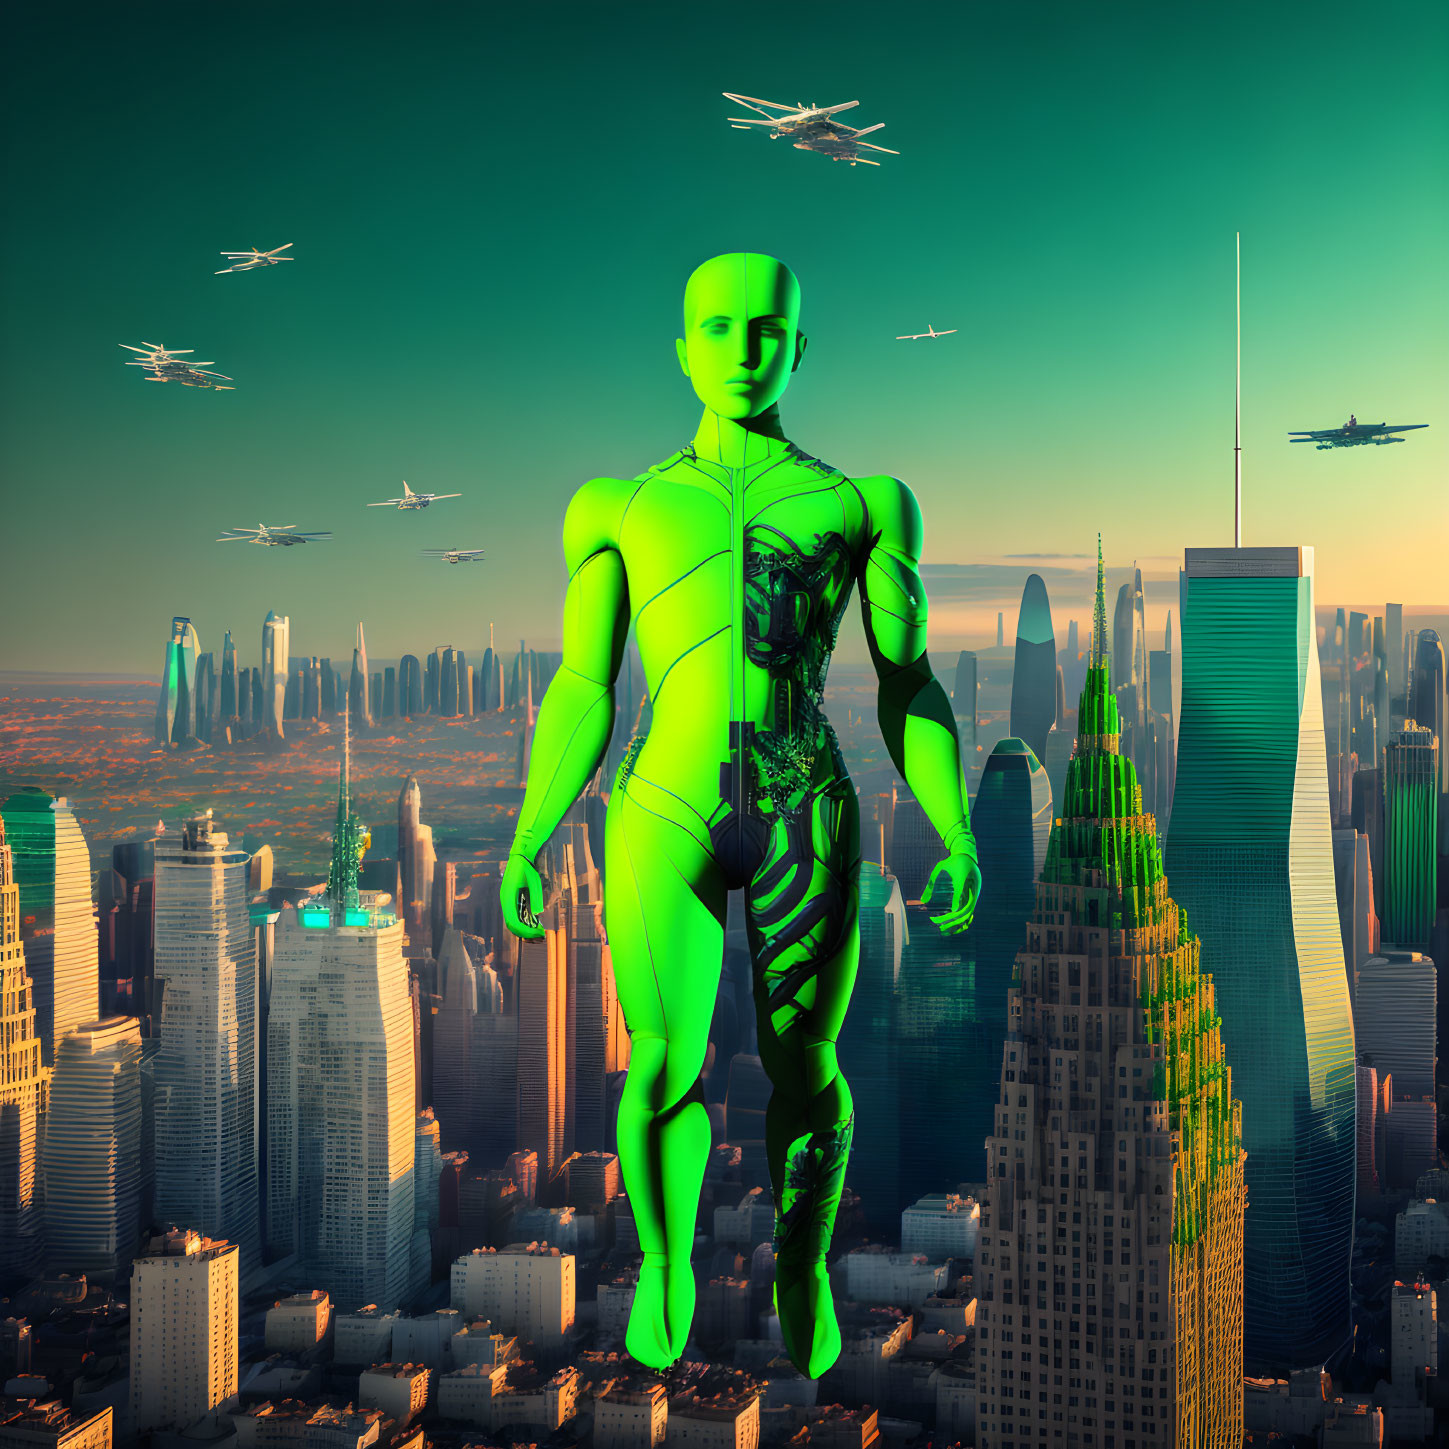 Green humanoid robot above futuristic cityscape with flying vehicles